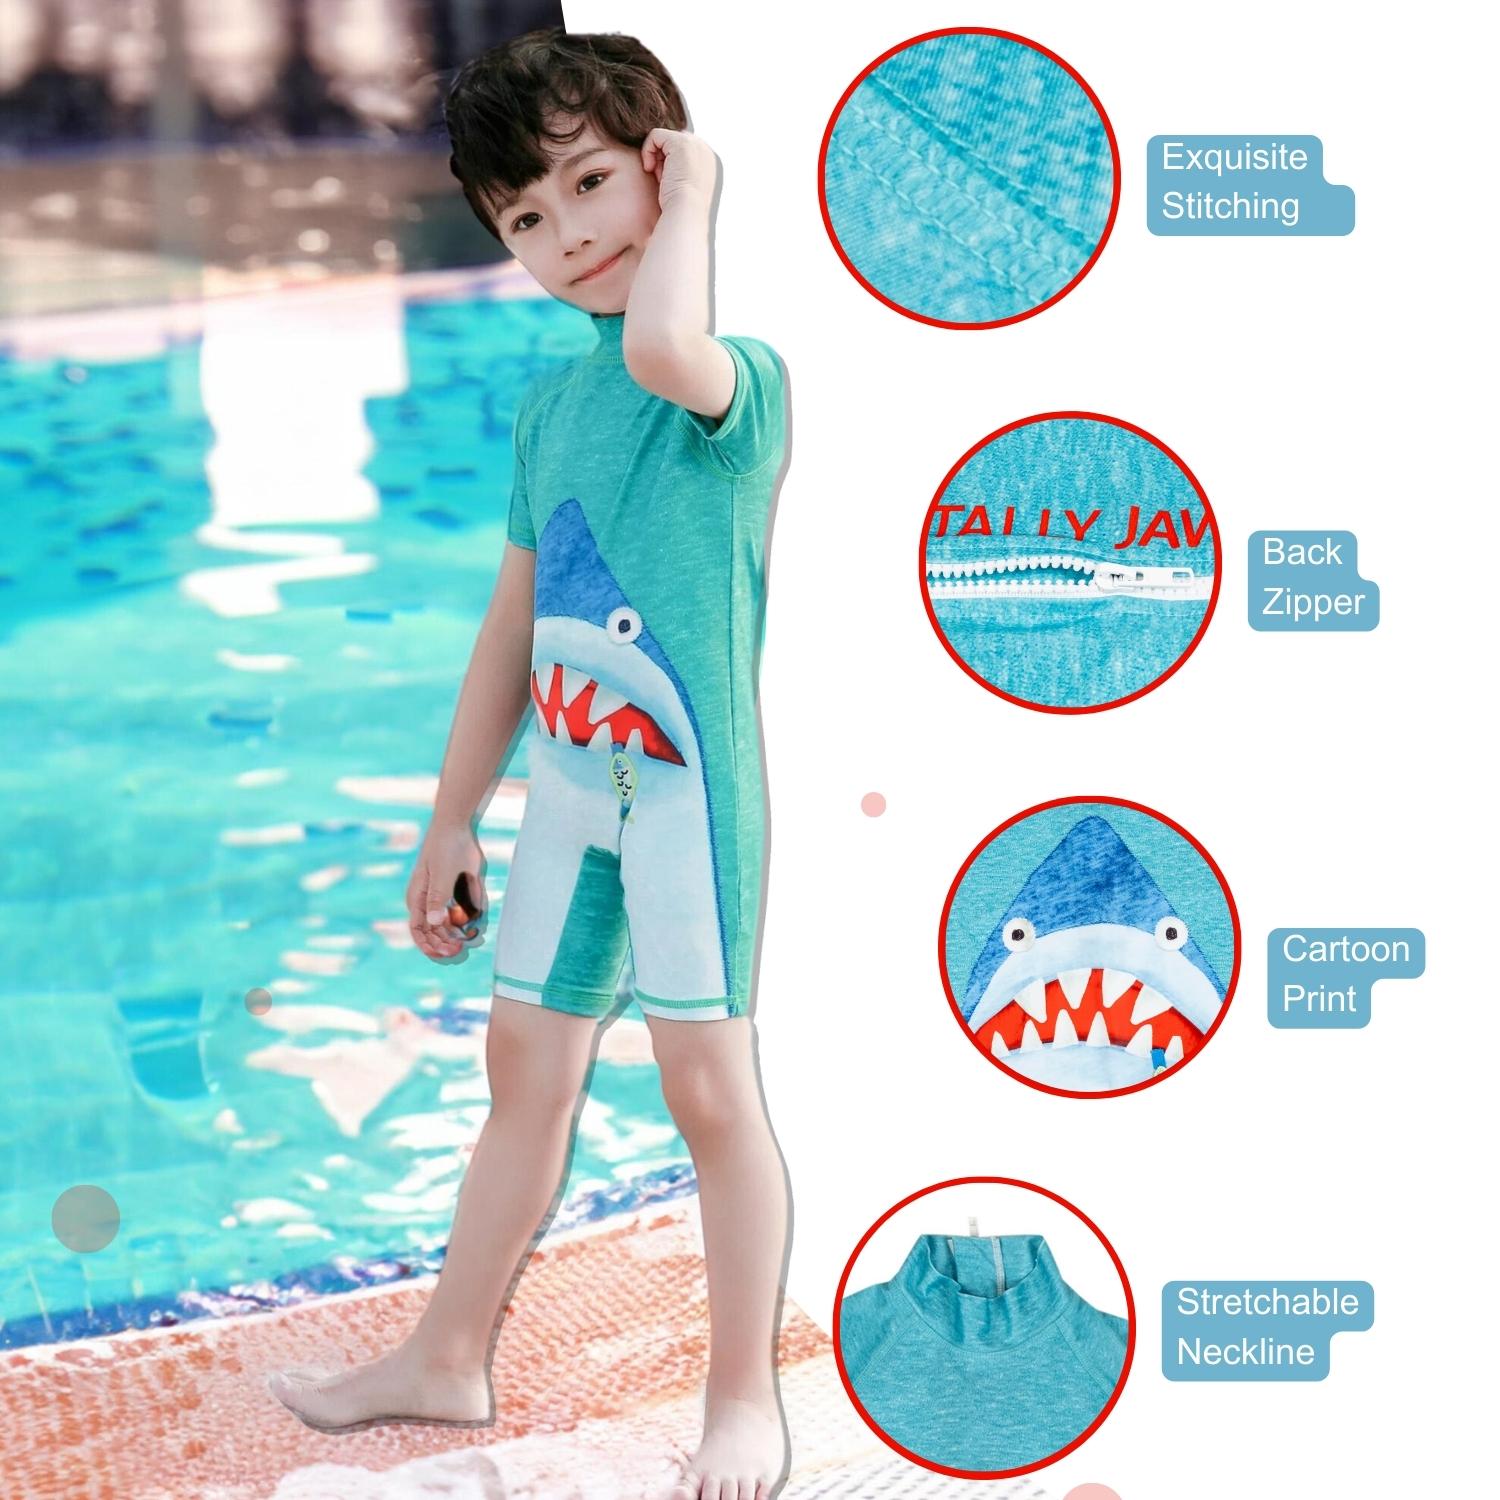 TWGE Swimwear for Boy Kid Body fit Stretchable Full Length Swimming Costume  for Boy Striped Boys Swimsuit - Buy TWGE Swimwear for Boy Kid Body fit  Stretchable Full Length Swimming Costume for